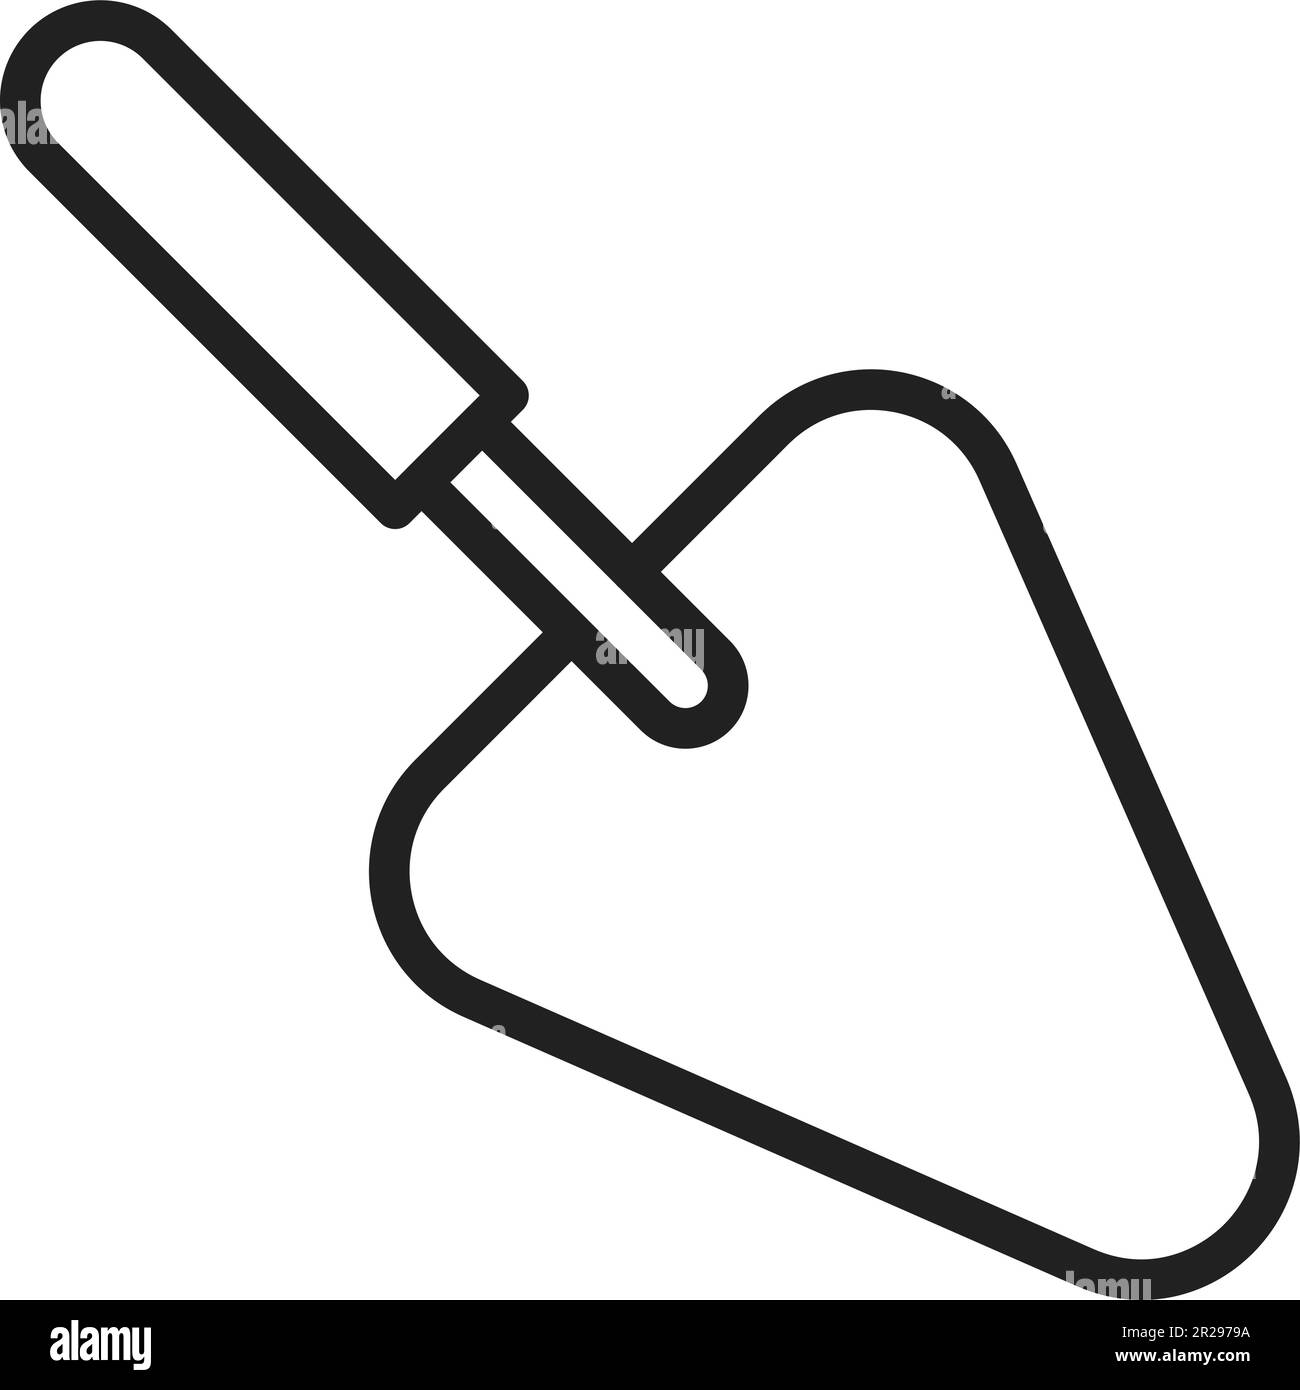 Trowel icon vector image. Suitable for mobile application web application and print media. Stock Vector